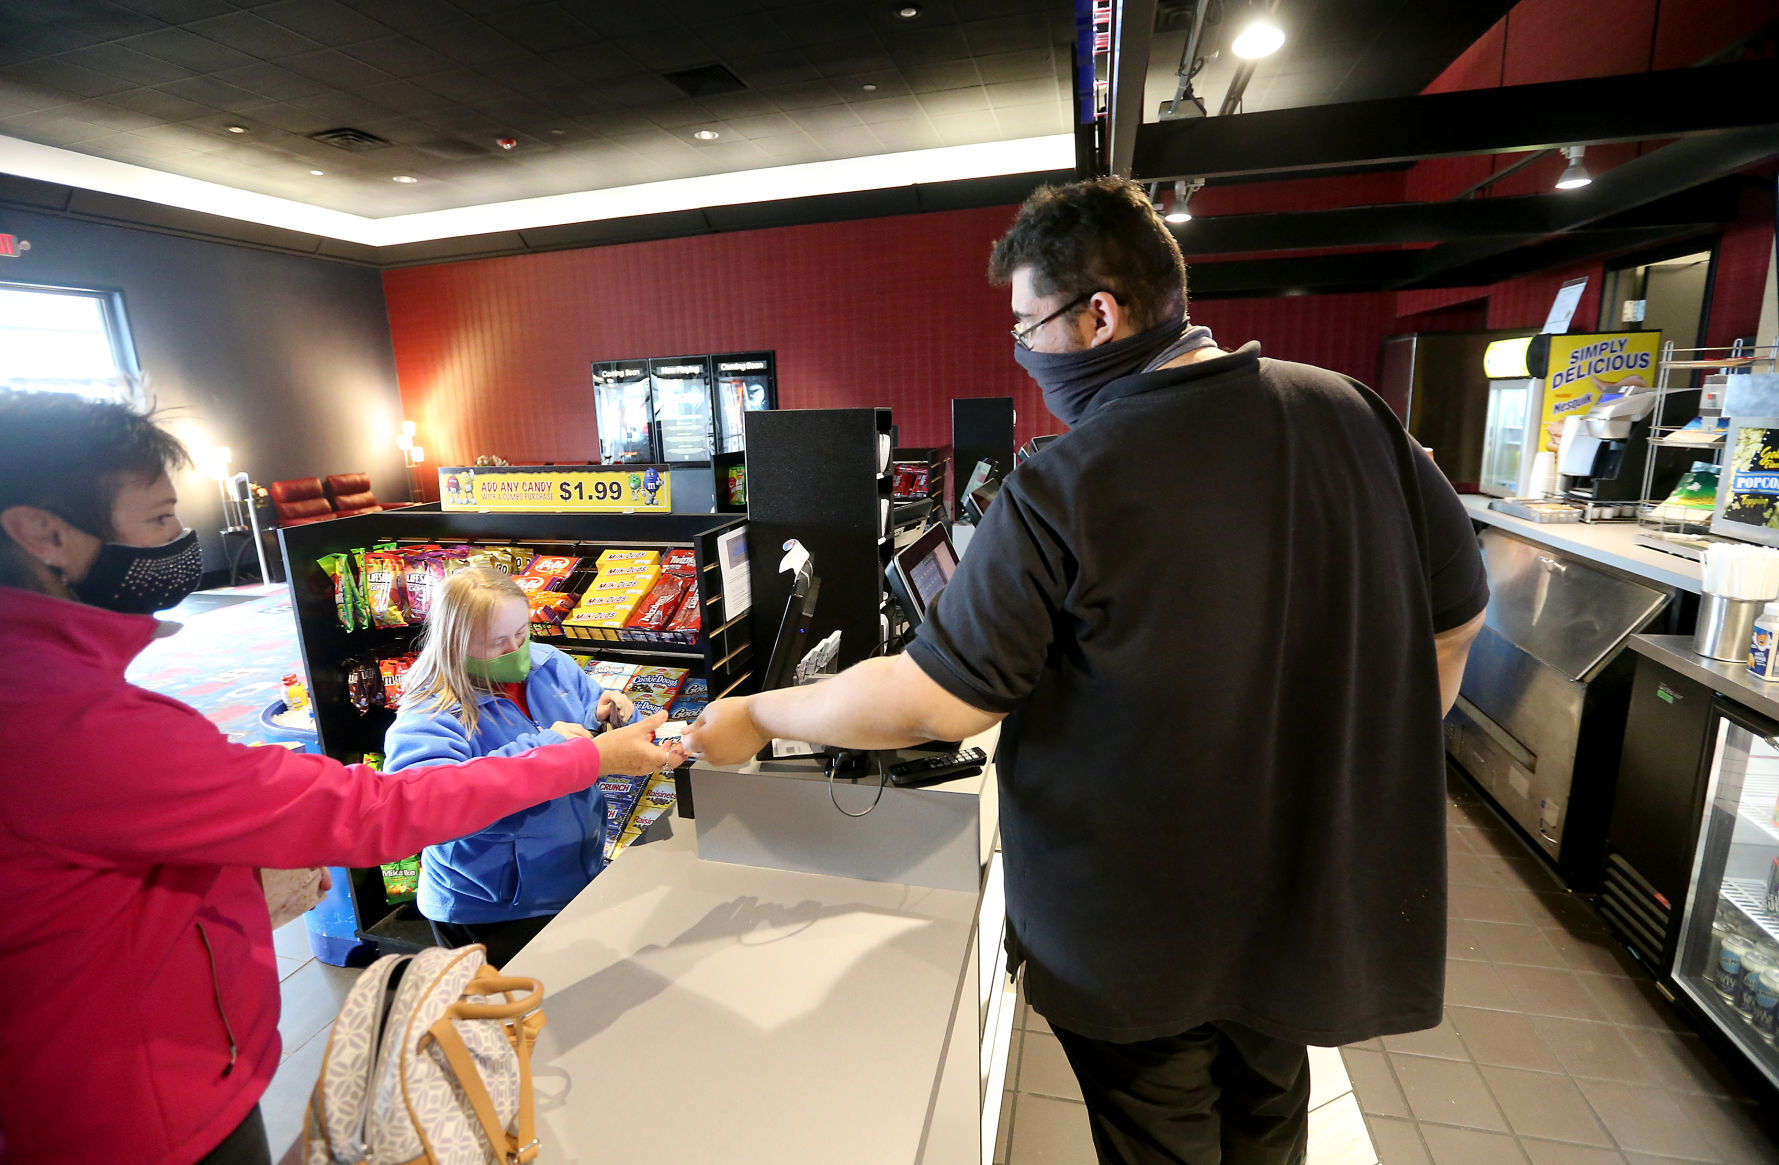 Dominik Cok hands tickets to Molly Ploessl (left) and Emily Cloos, both of Bellevue, Iowa, at Phoenix Theatres in Dubuque on Thursday. PHOTO CREDIT: JESSICA REILLY